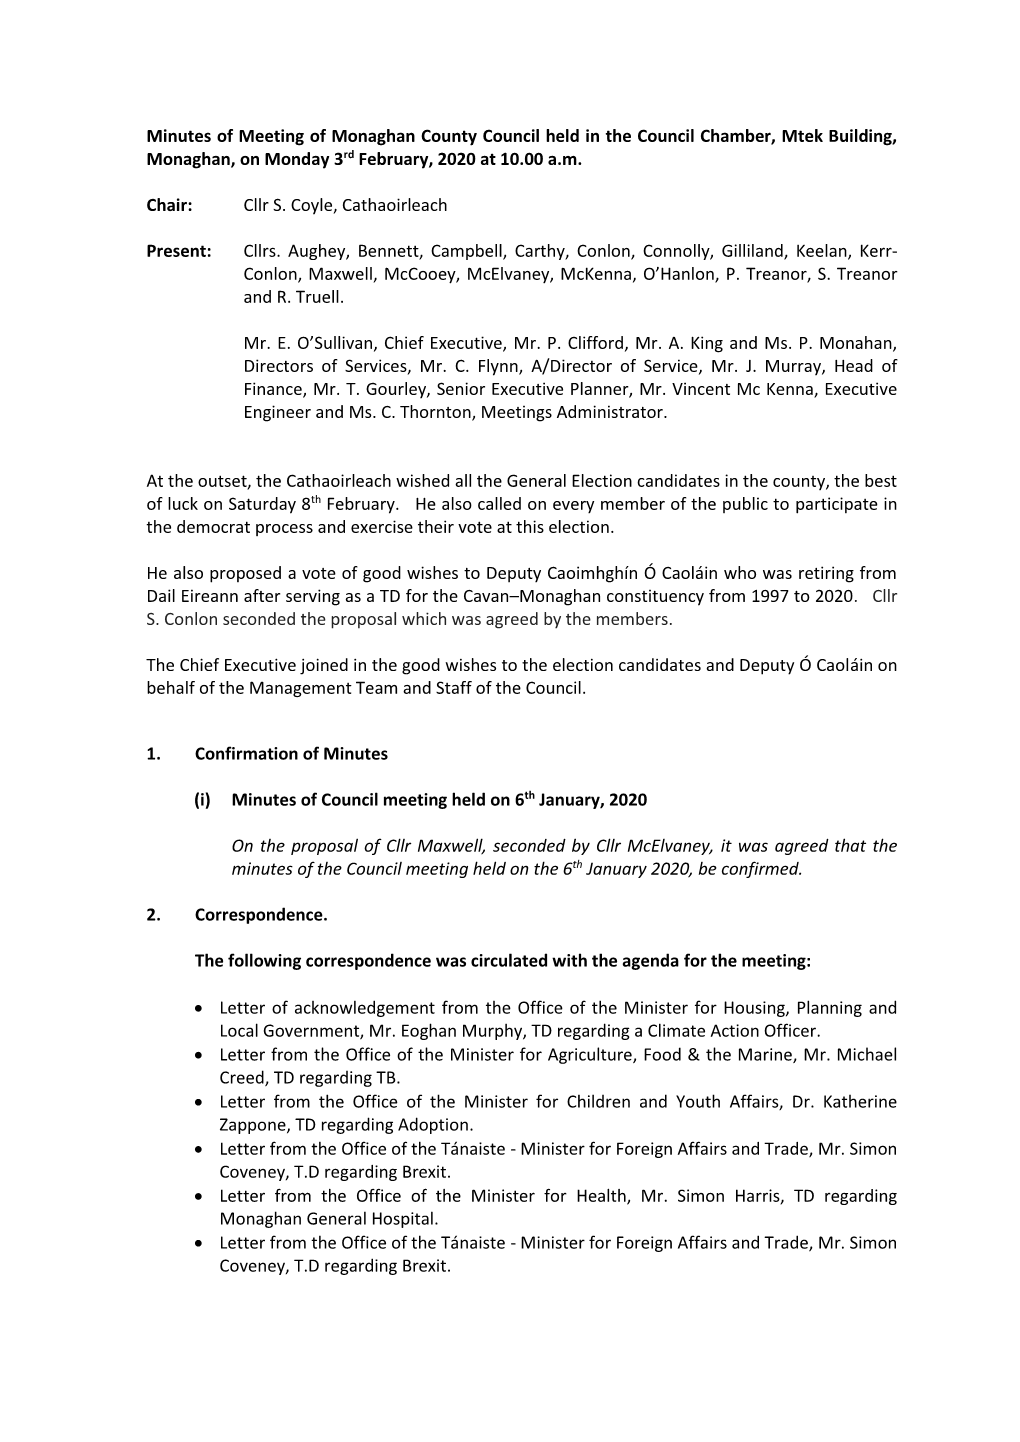 Council Meeting Minutes 3Rd February 2020